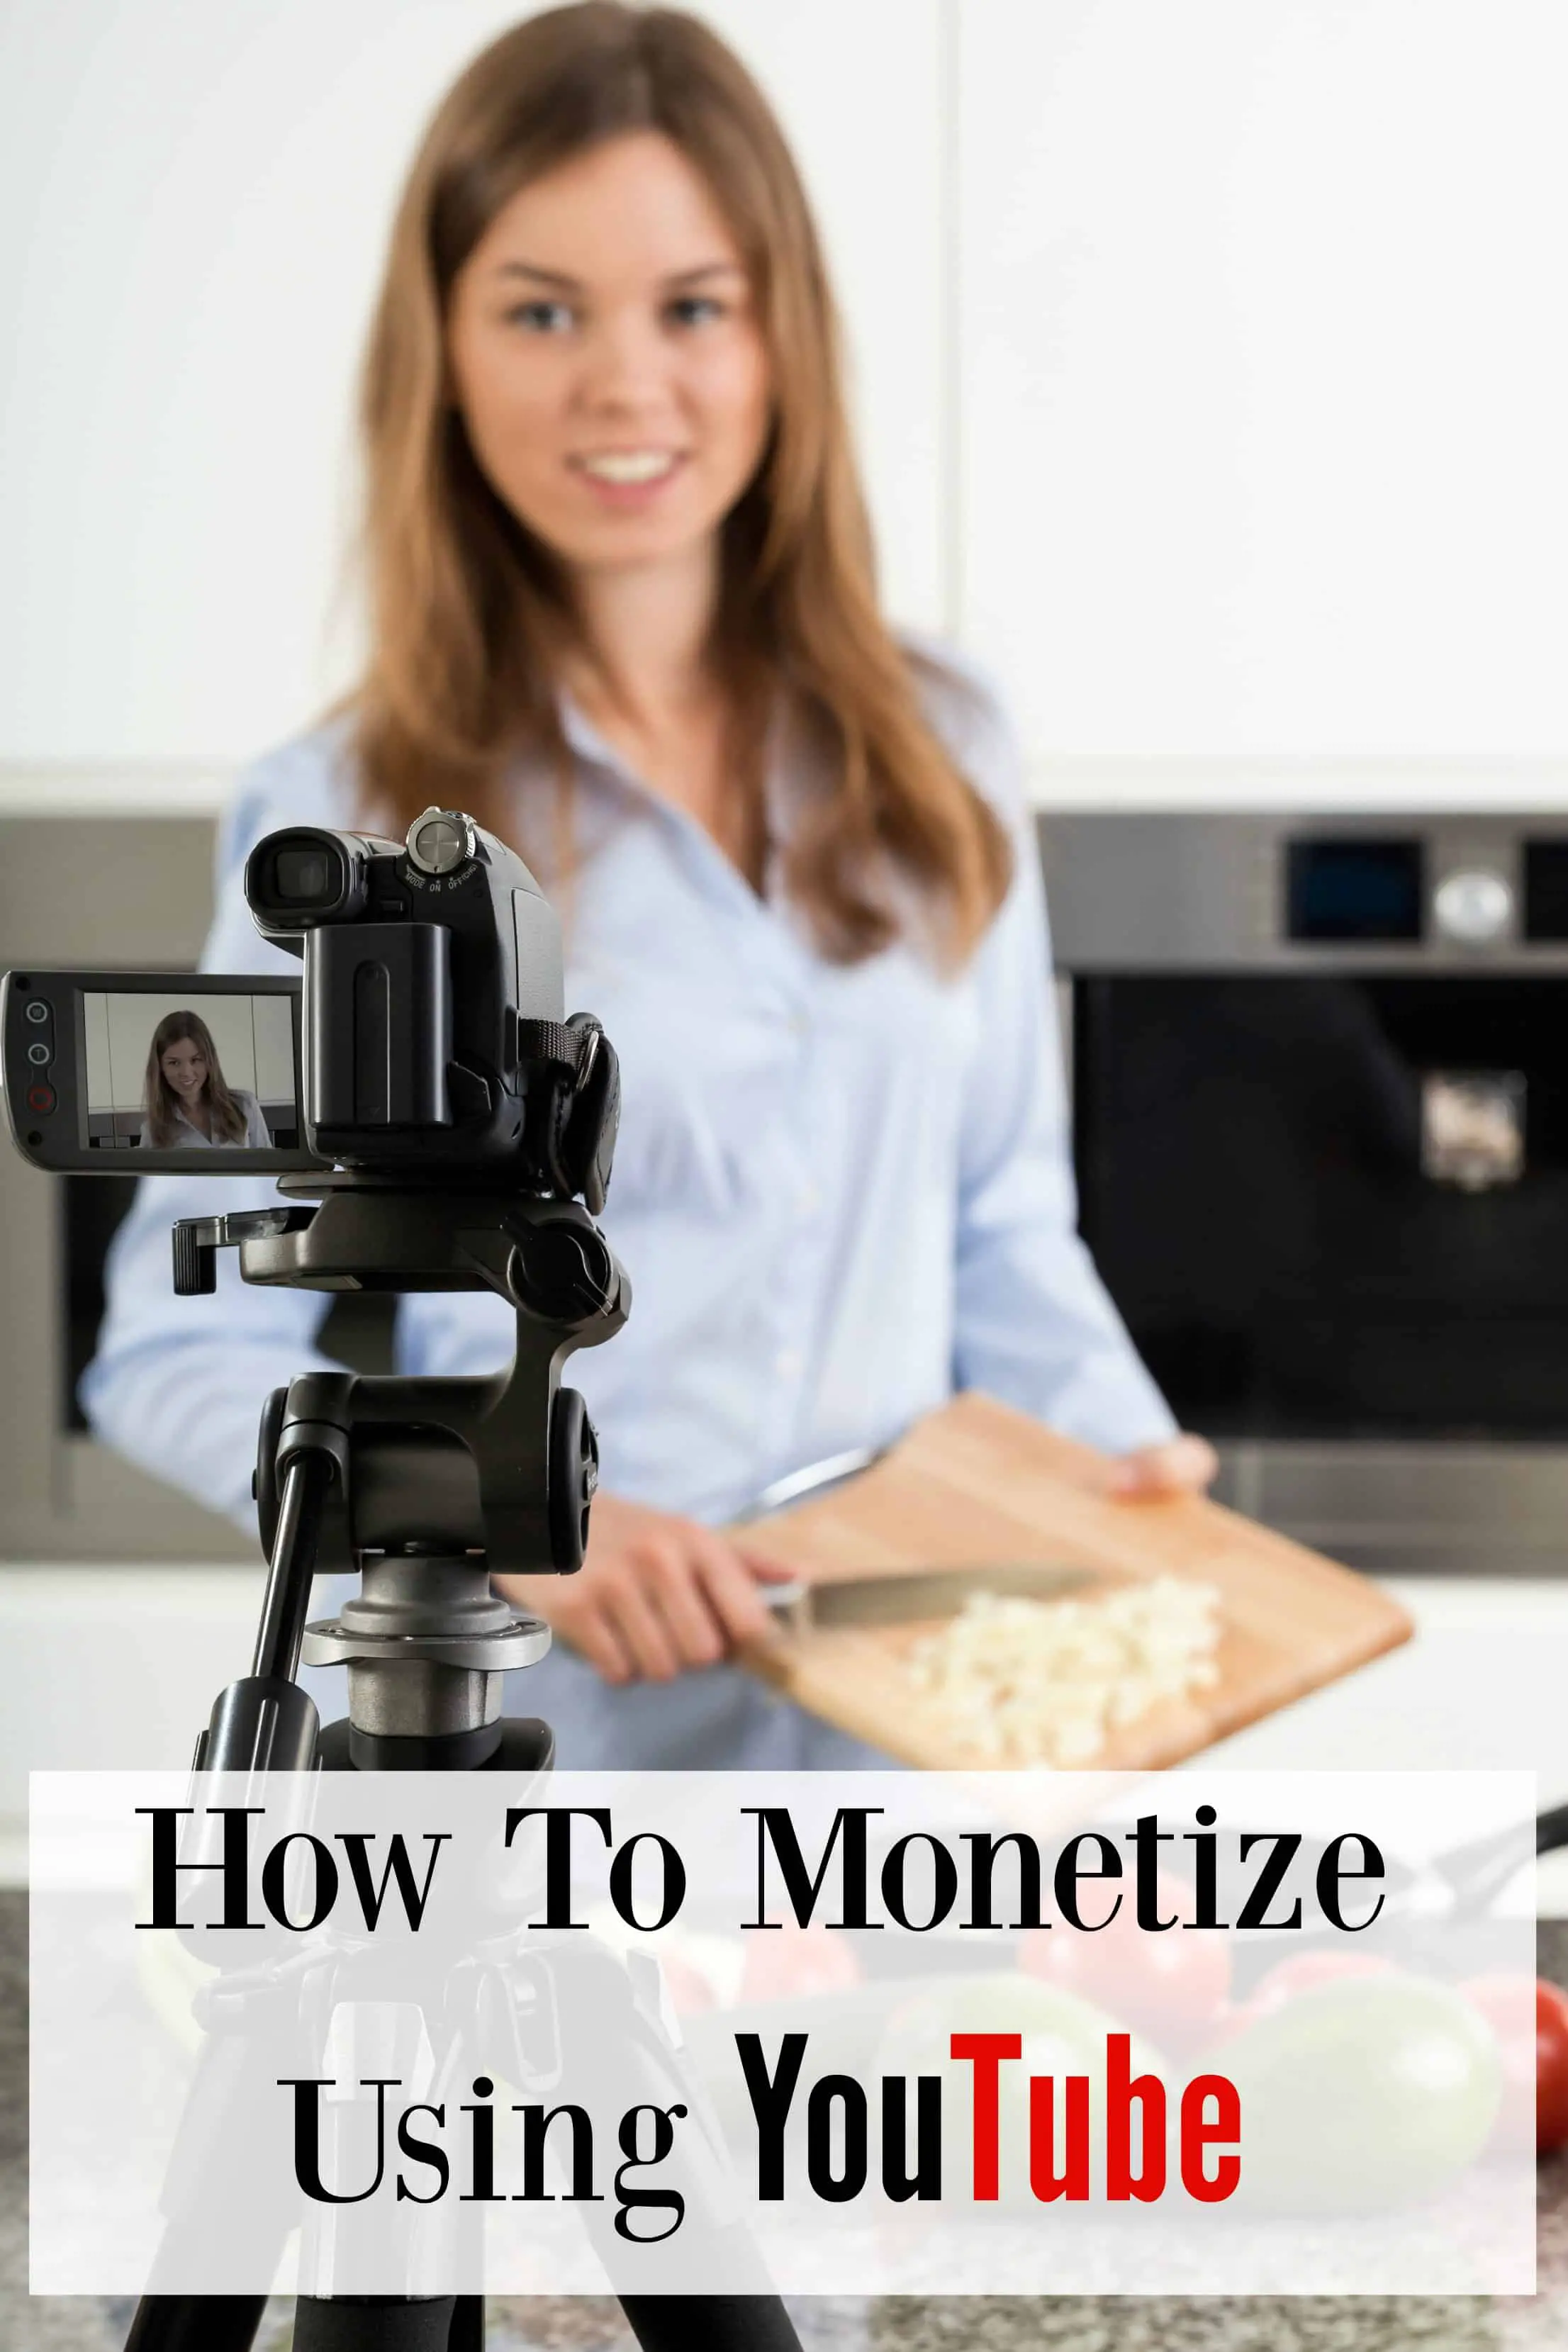 Learn how to monetize using YouTube so you can work from home doing what you love and creating content for your viewers every day!